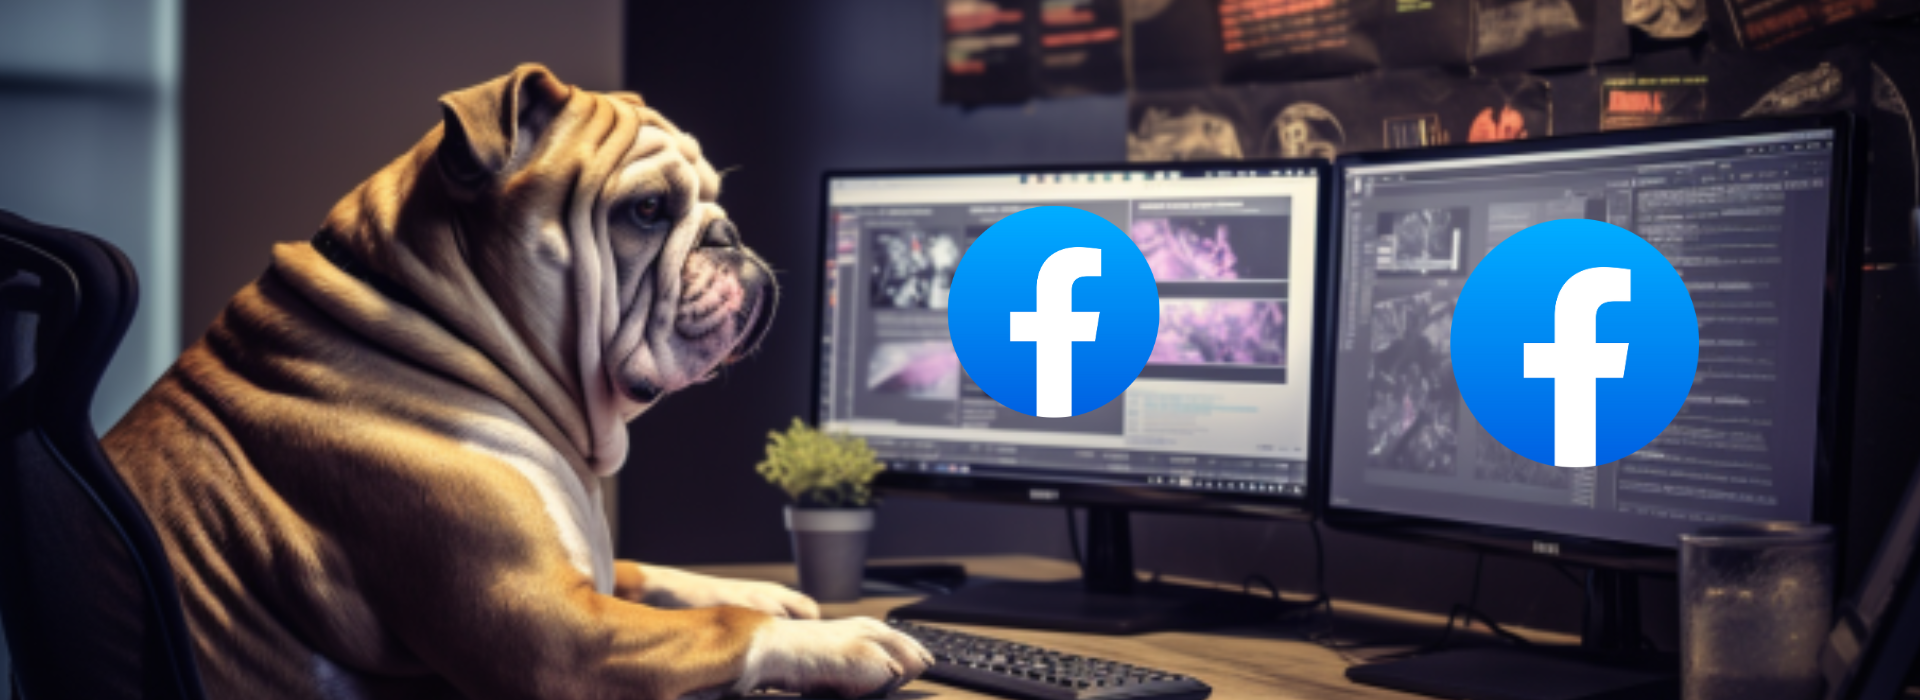 Bulldog using a computer with two monitors. Each monitor features the Facebook icon.